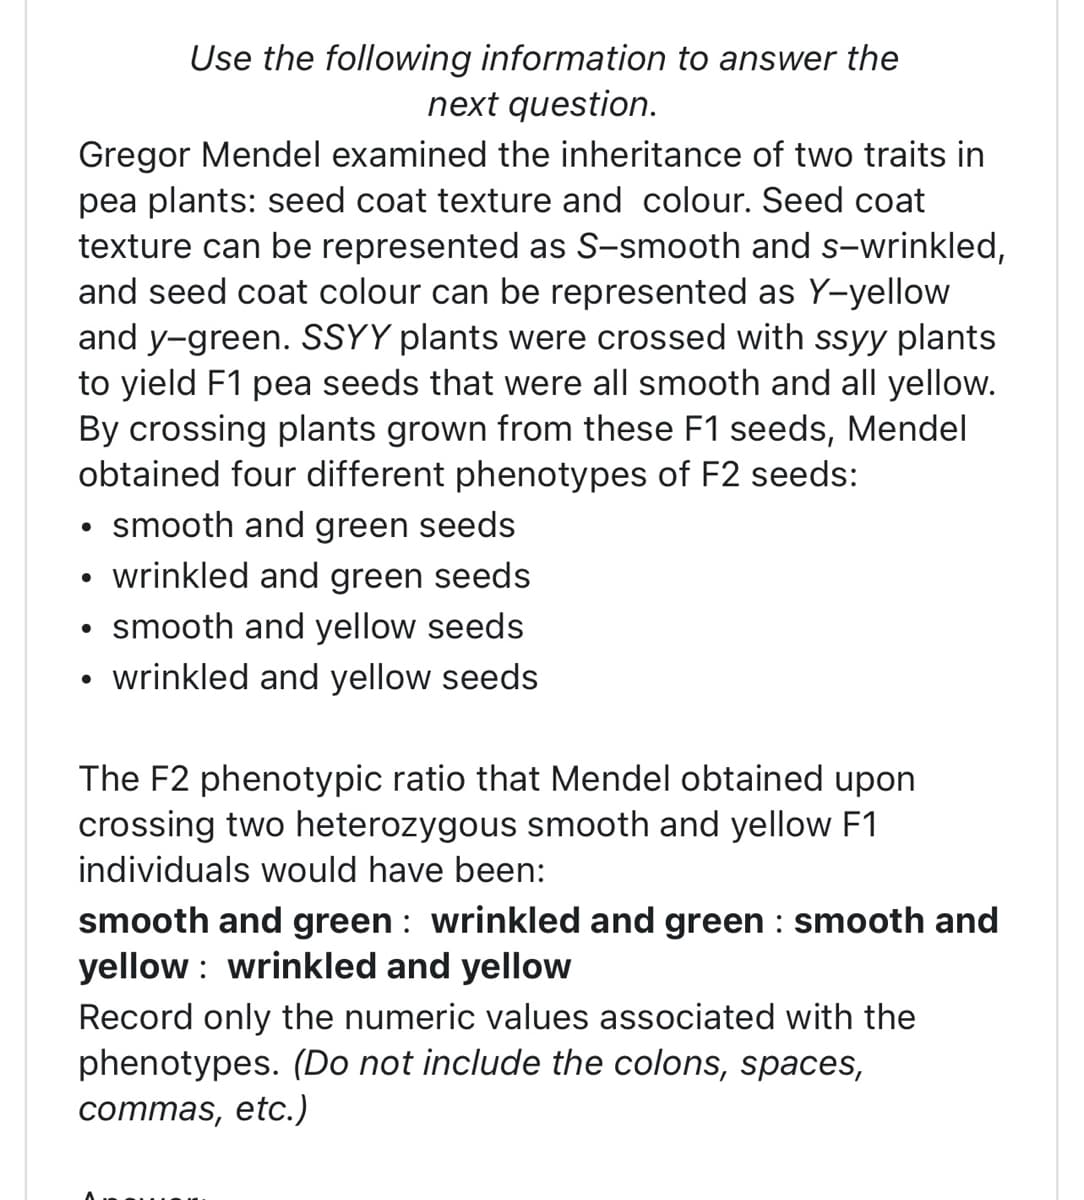 Gregor Mendel examined the inheritance of two traits in
pea plants: seed coat texture and colour. Seed coat
texture can be represented as S-smooth and s-wrinkled,
and seed coat colour can be represented as Y-yellow
and y-green. SSYY plants were crossed with ssyy plants
to yield F1 pea seeds that were all smooth and all yellow.
By crossing plants grown from these F1 seeds, Mendel
obtained four different phenotypes of F2 seeds:
• smooth and green seeds
wrinkled and green seeds
smooth and yellow seeds
wrinkled and yellow seeds
●
Use the following information to answer the
next question.
●
The F2 phenotypic ratio that Mendel obtained upon
crossing two heterozygous smooth and yellow F1
individuals would have been:
smooth and green wrinkled and green : smooth and
yellow: wrinkled and yellow
Record only the numeric values associated with the
phenotypes. (Do not include the colons, spaces,
commas, etc.)